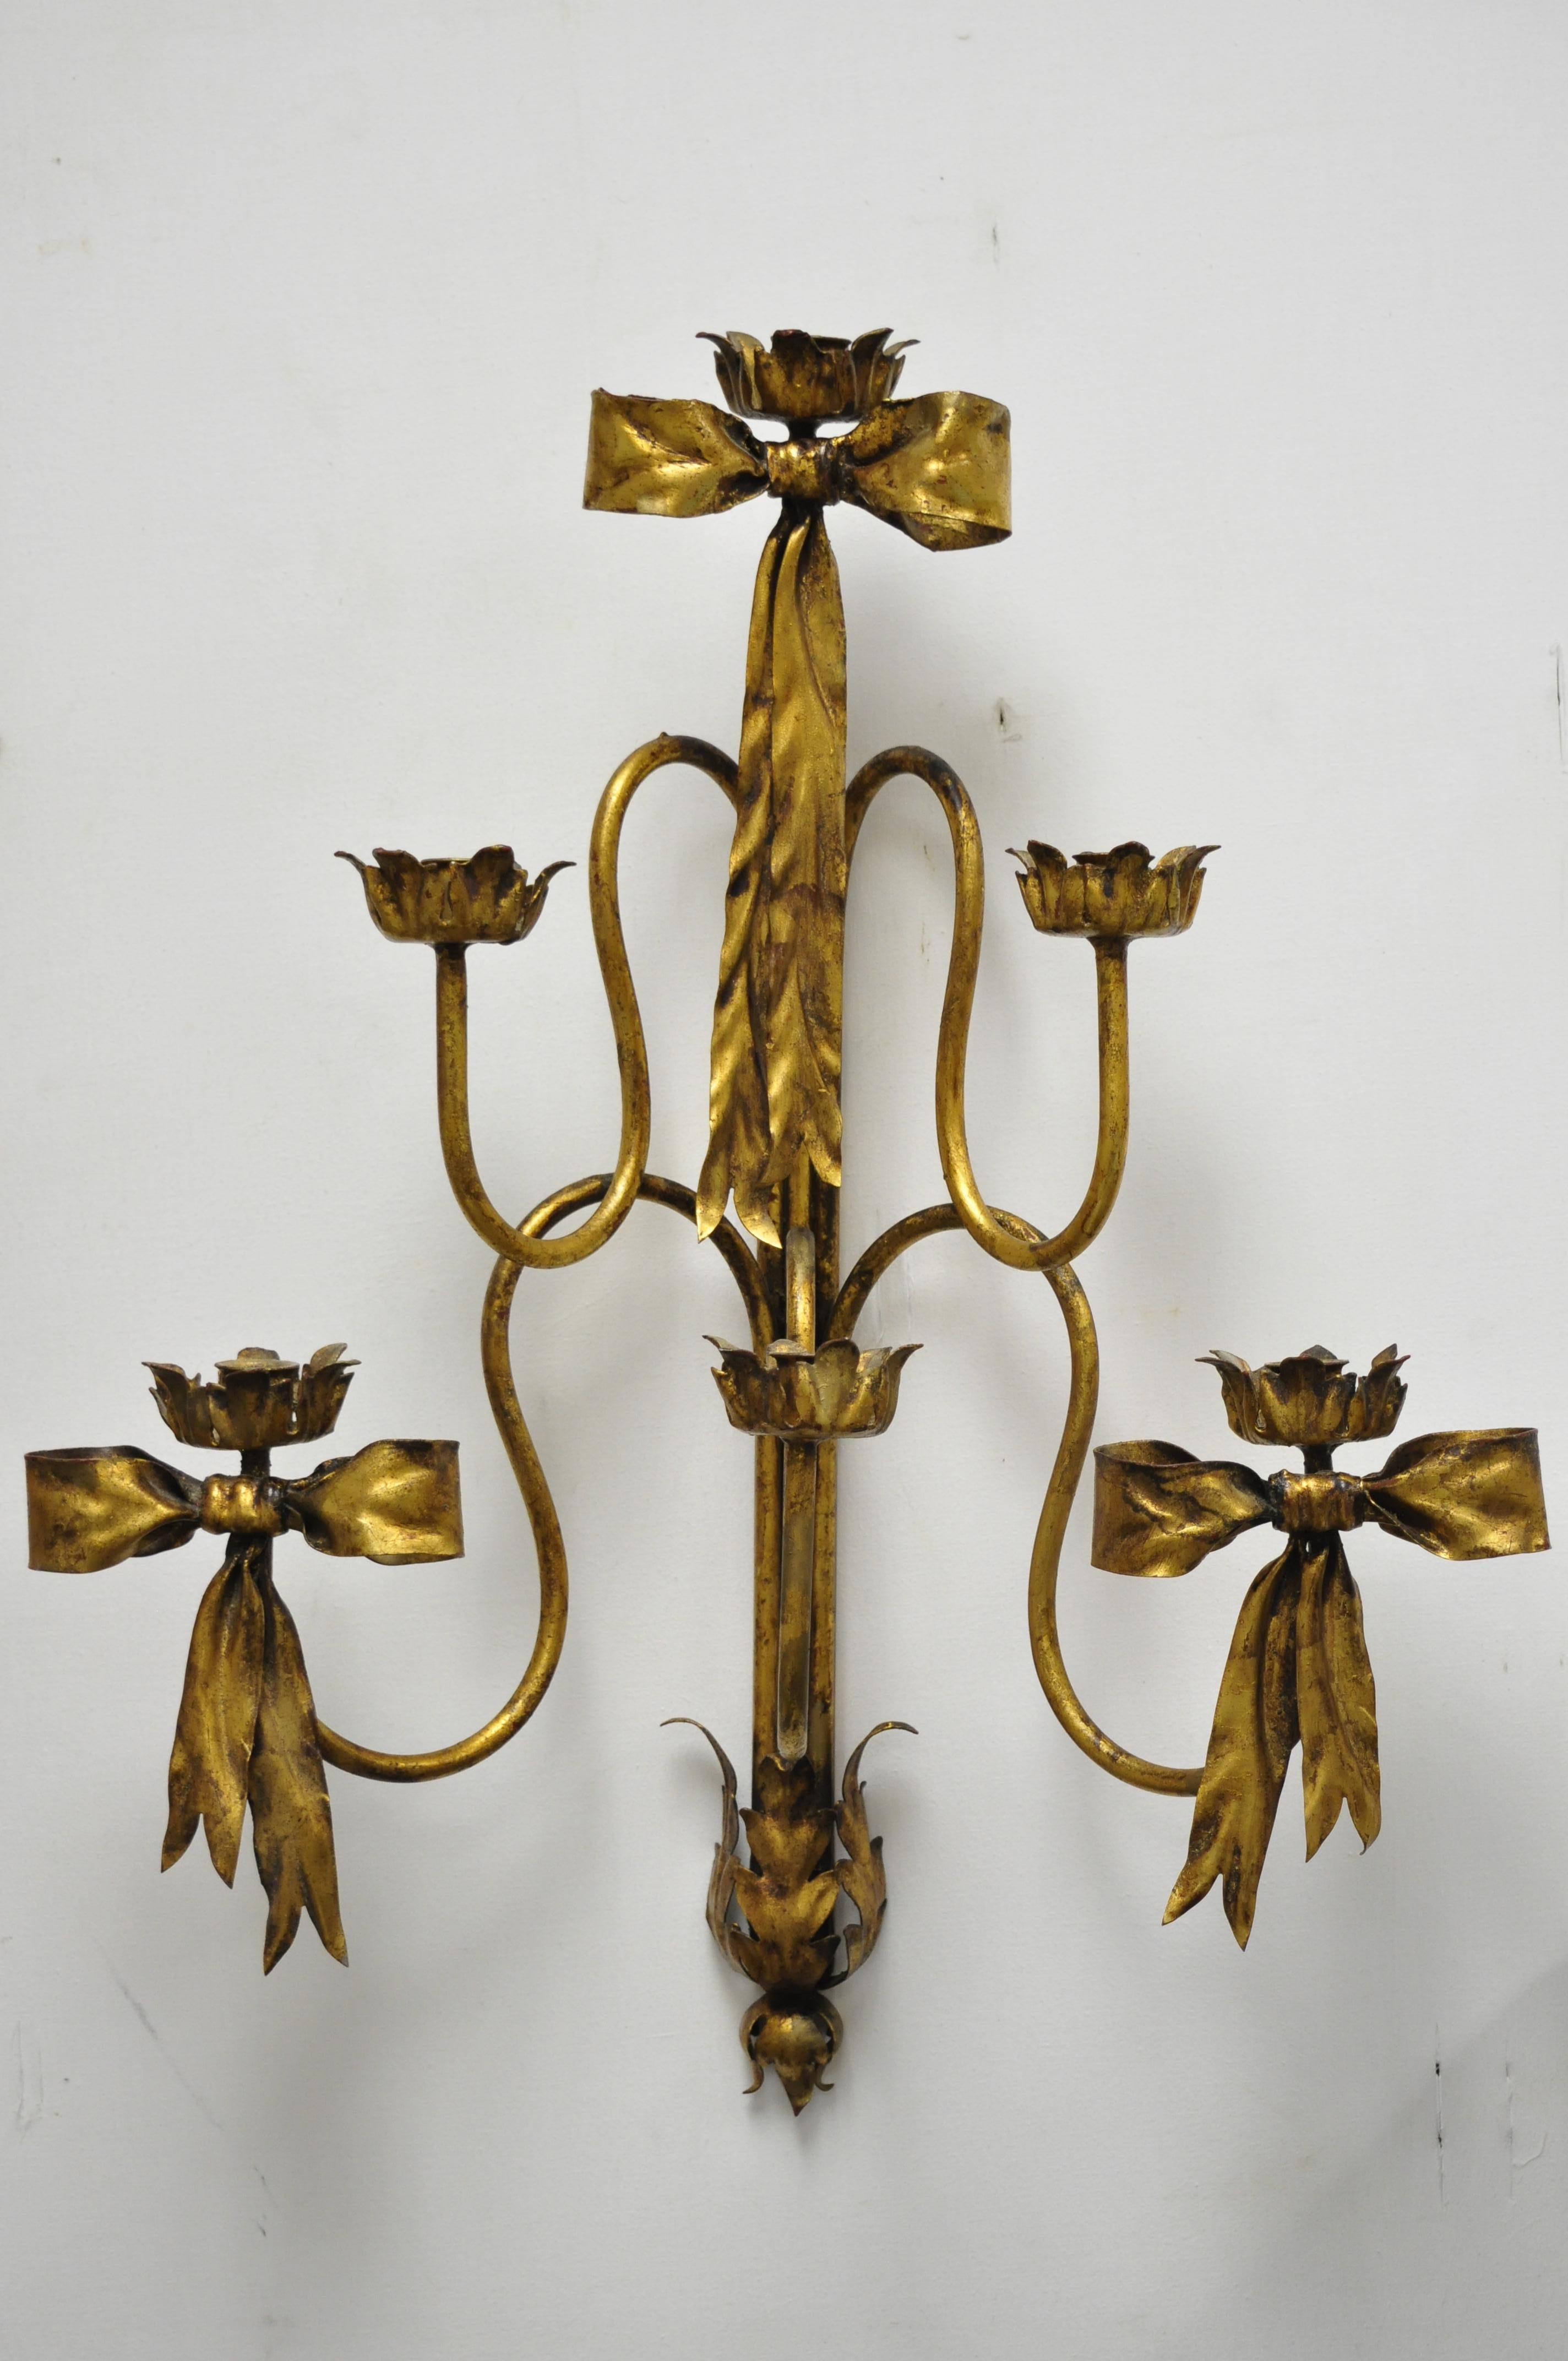 Pair of Italian Hollywood Regency gold iron bow form tole metal wall sconces candelabra. Items feature wrought iron frames, 6 arms, 6 candleholders, gold leaf finish, original label, very nice antique item, does not include candles, circa mid-20th